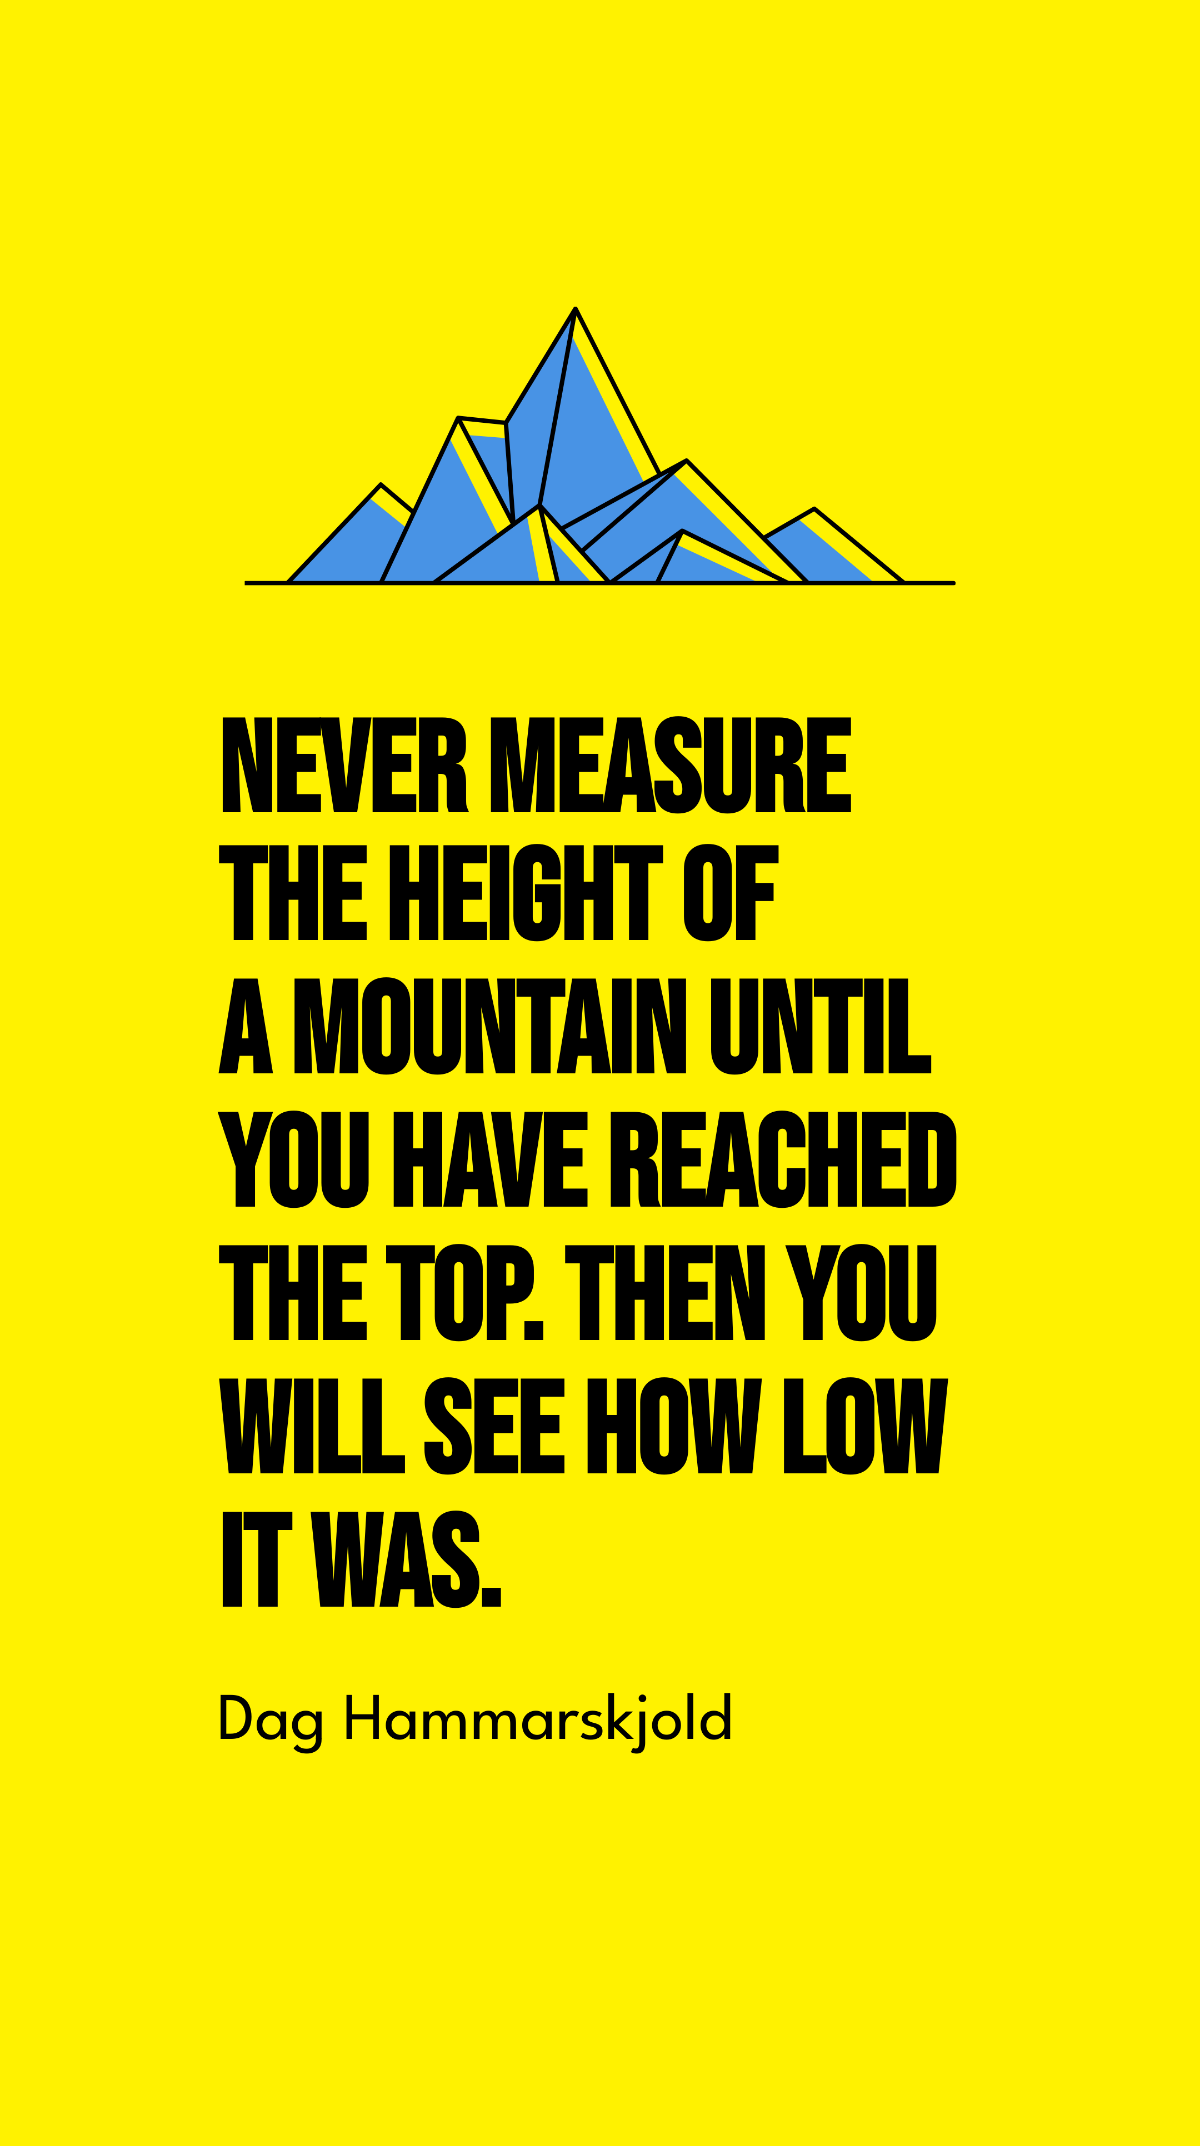 Free Dag Hammarskjold - Never measure the height of a mountain until you have reached the top. Then you will see how low it was. Template